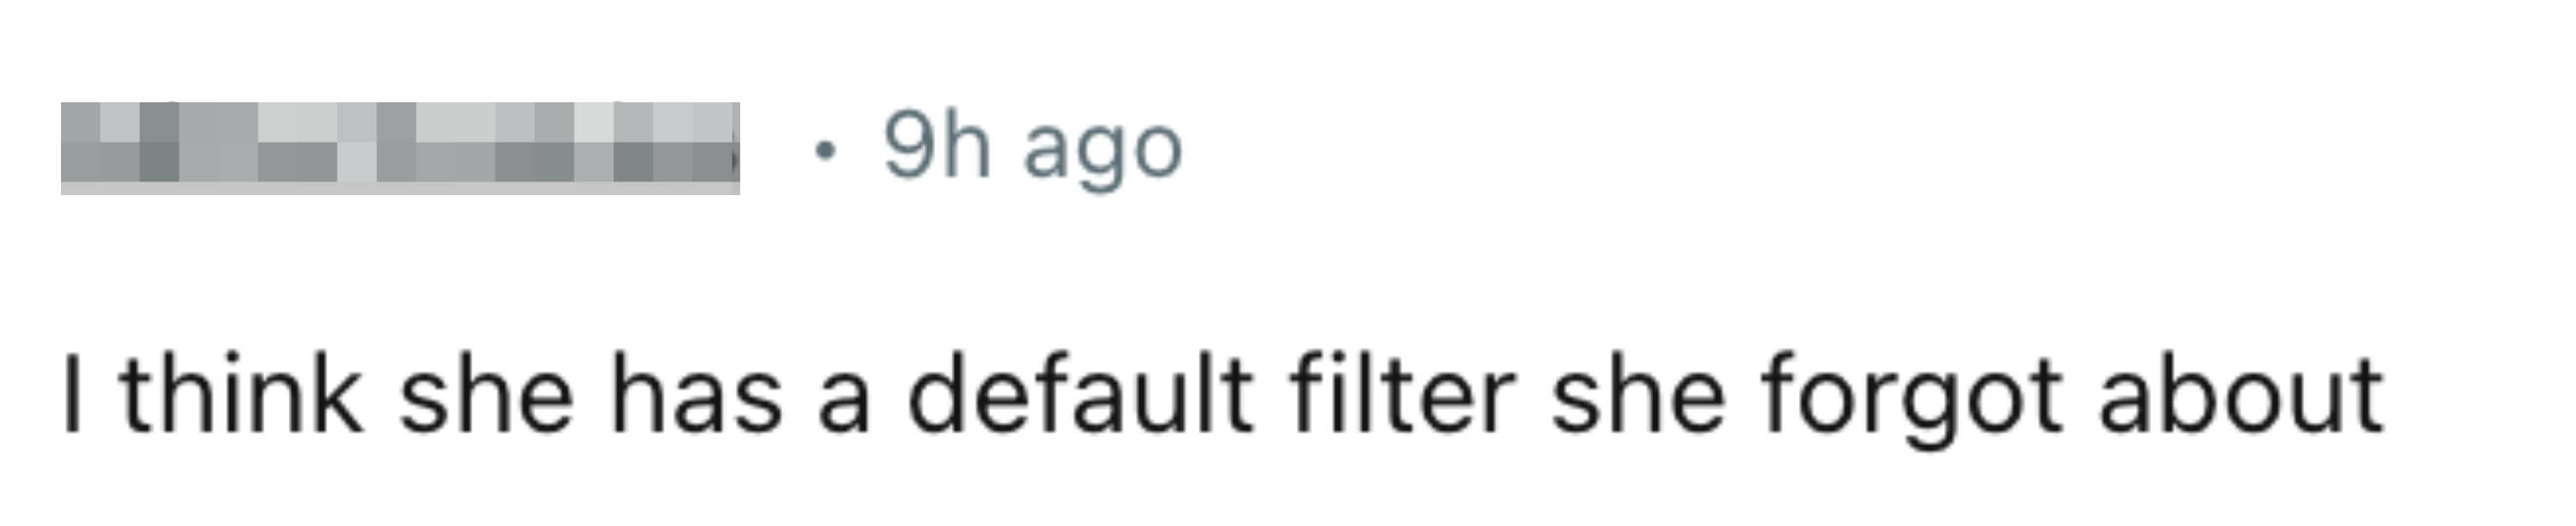 Comment on a social media post reading &quot;I think she has a default filter she forgot about&quot;